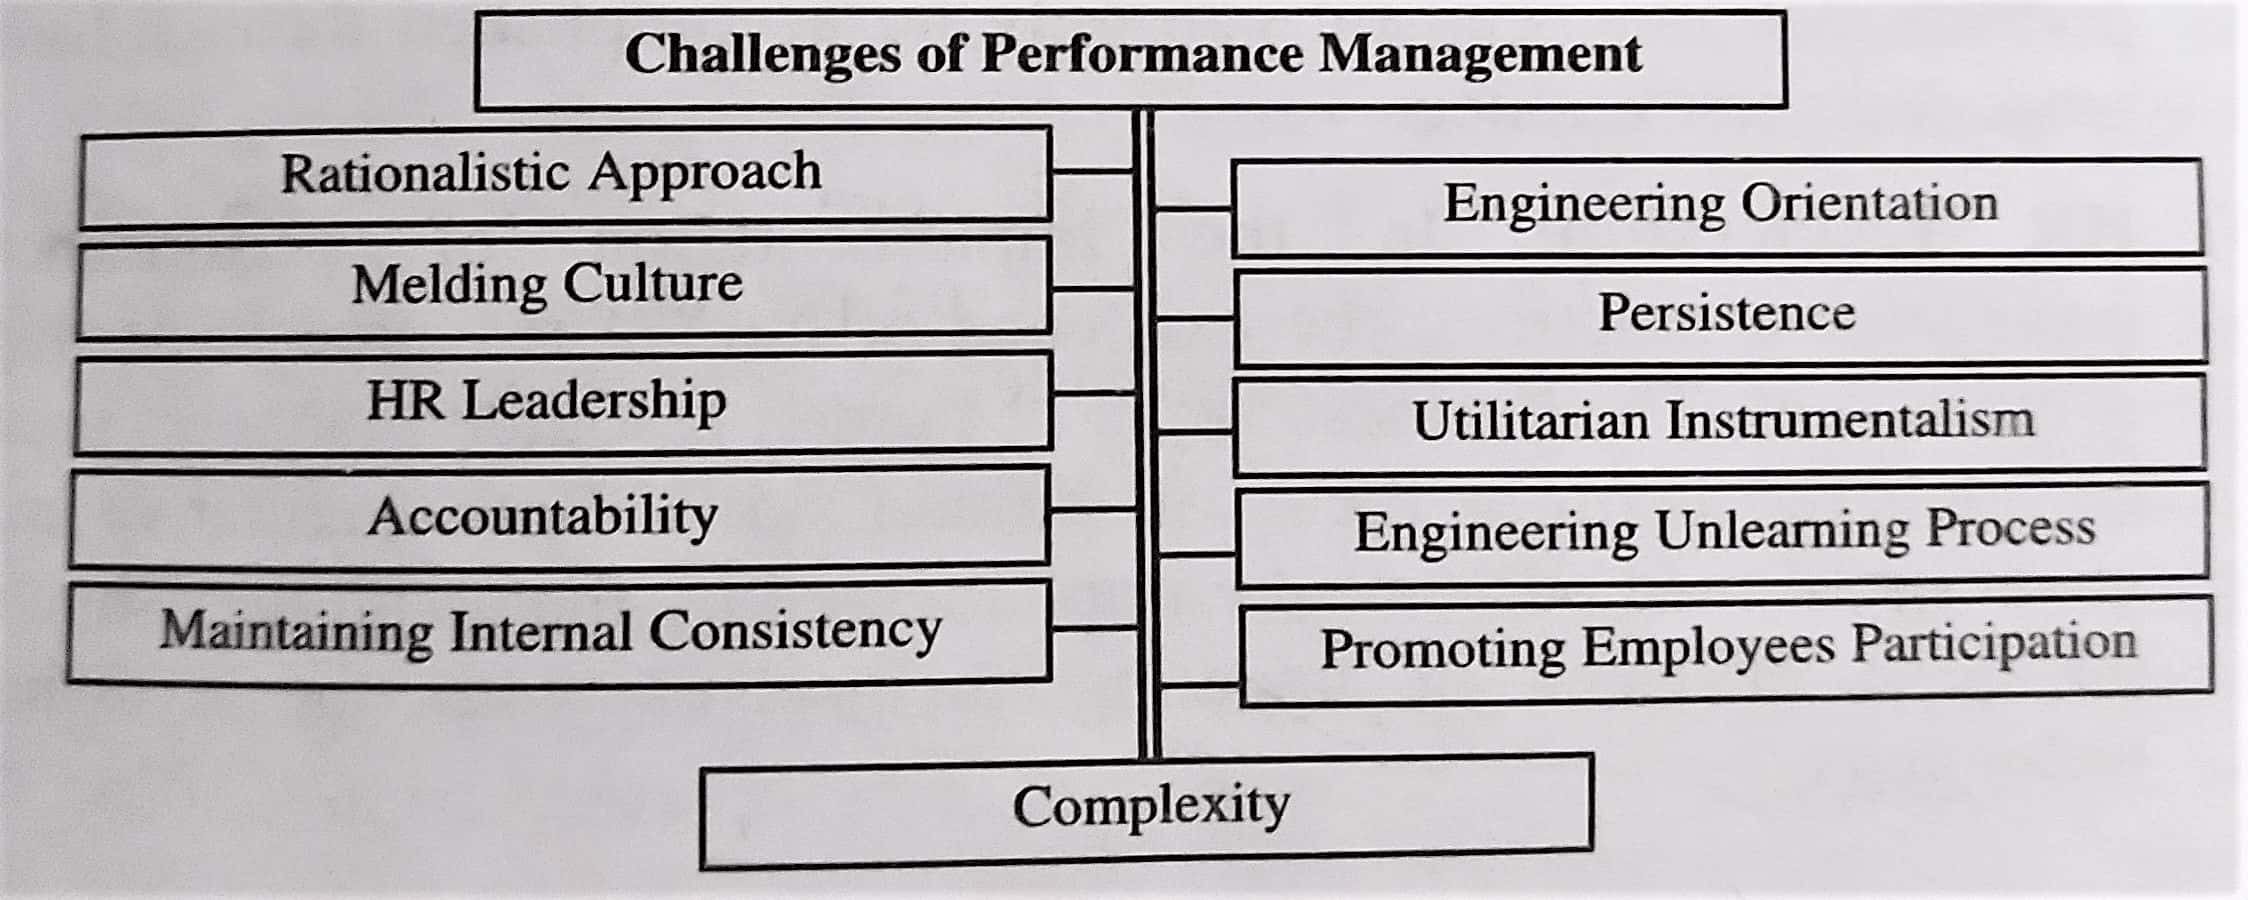 Challenges of Performance Management